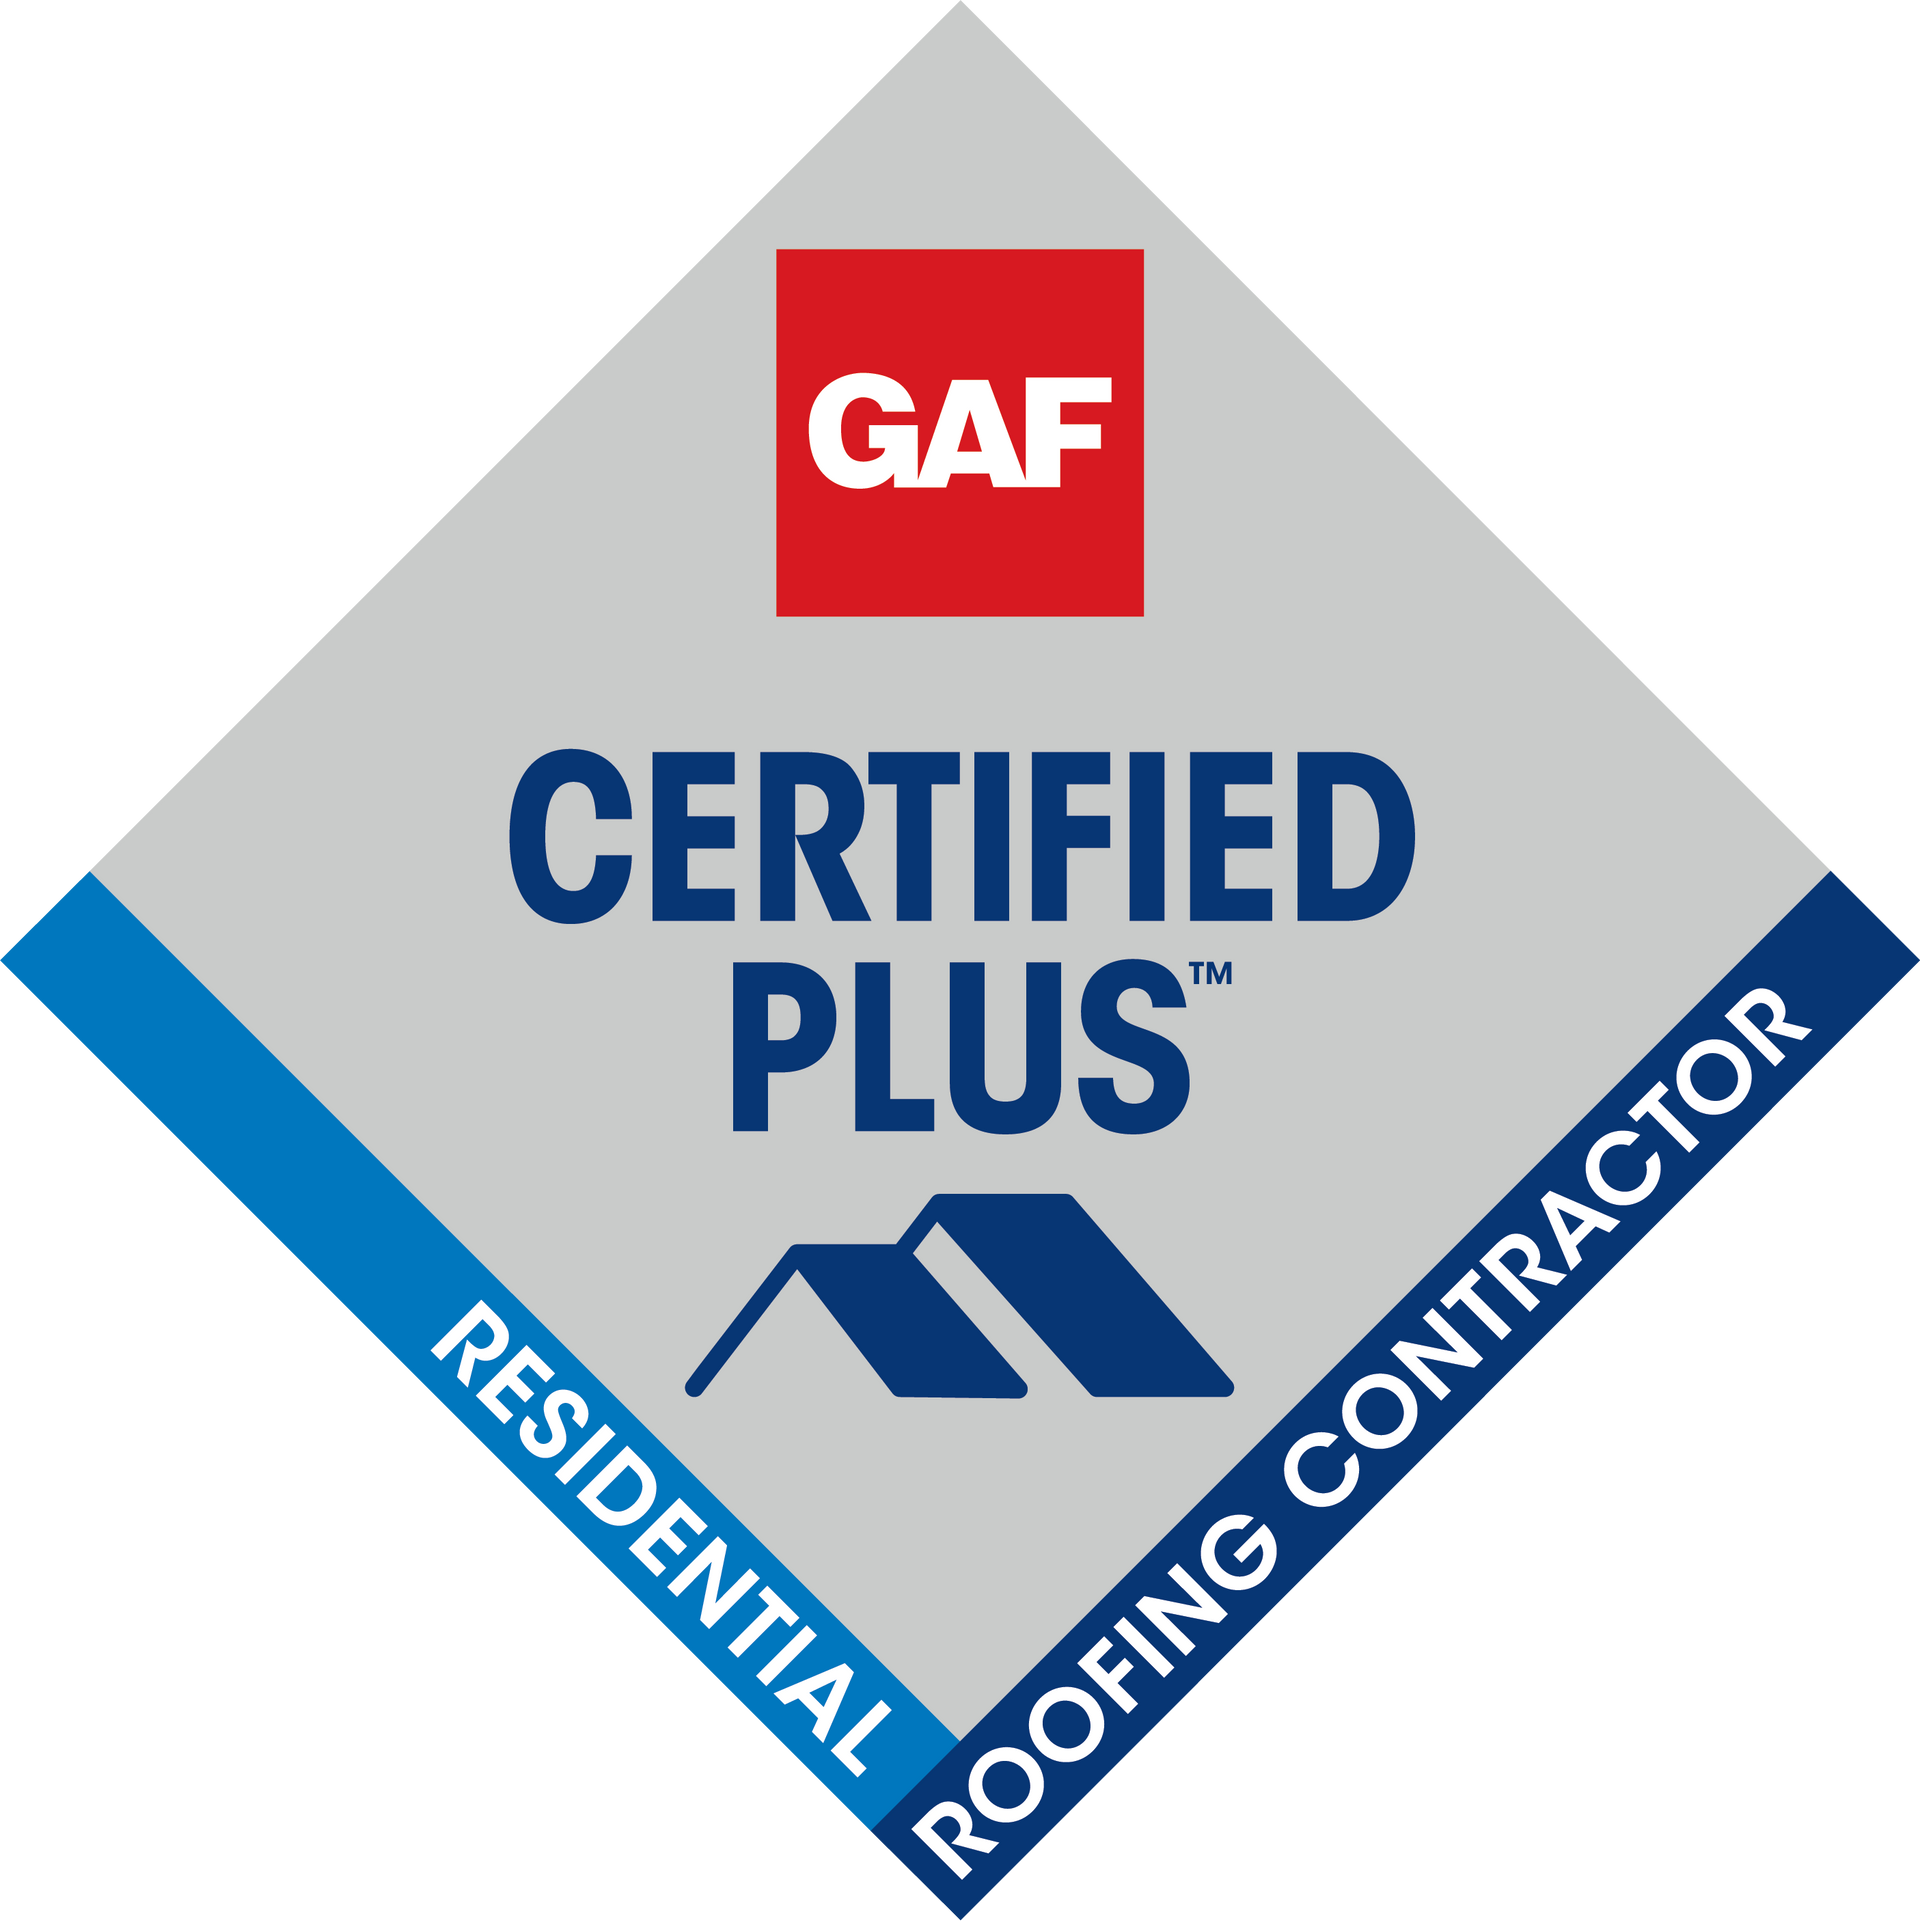 GAF Certified Plus Residential Roofing Contractor logo